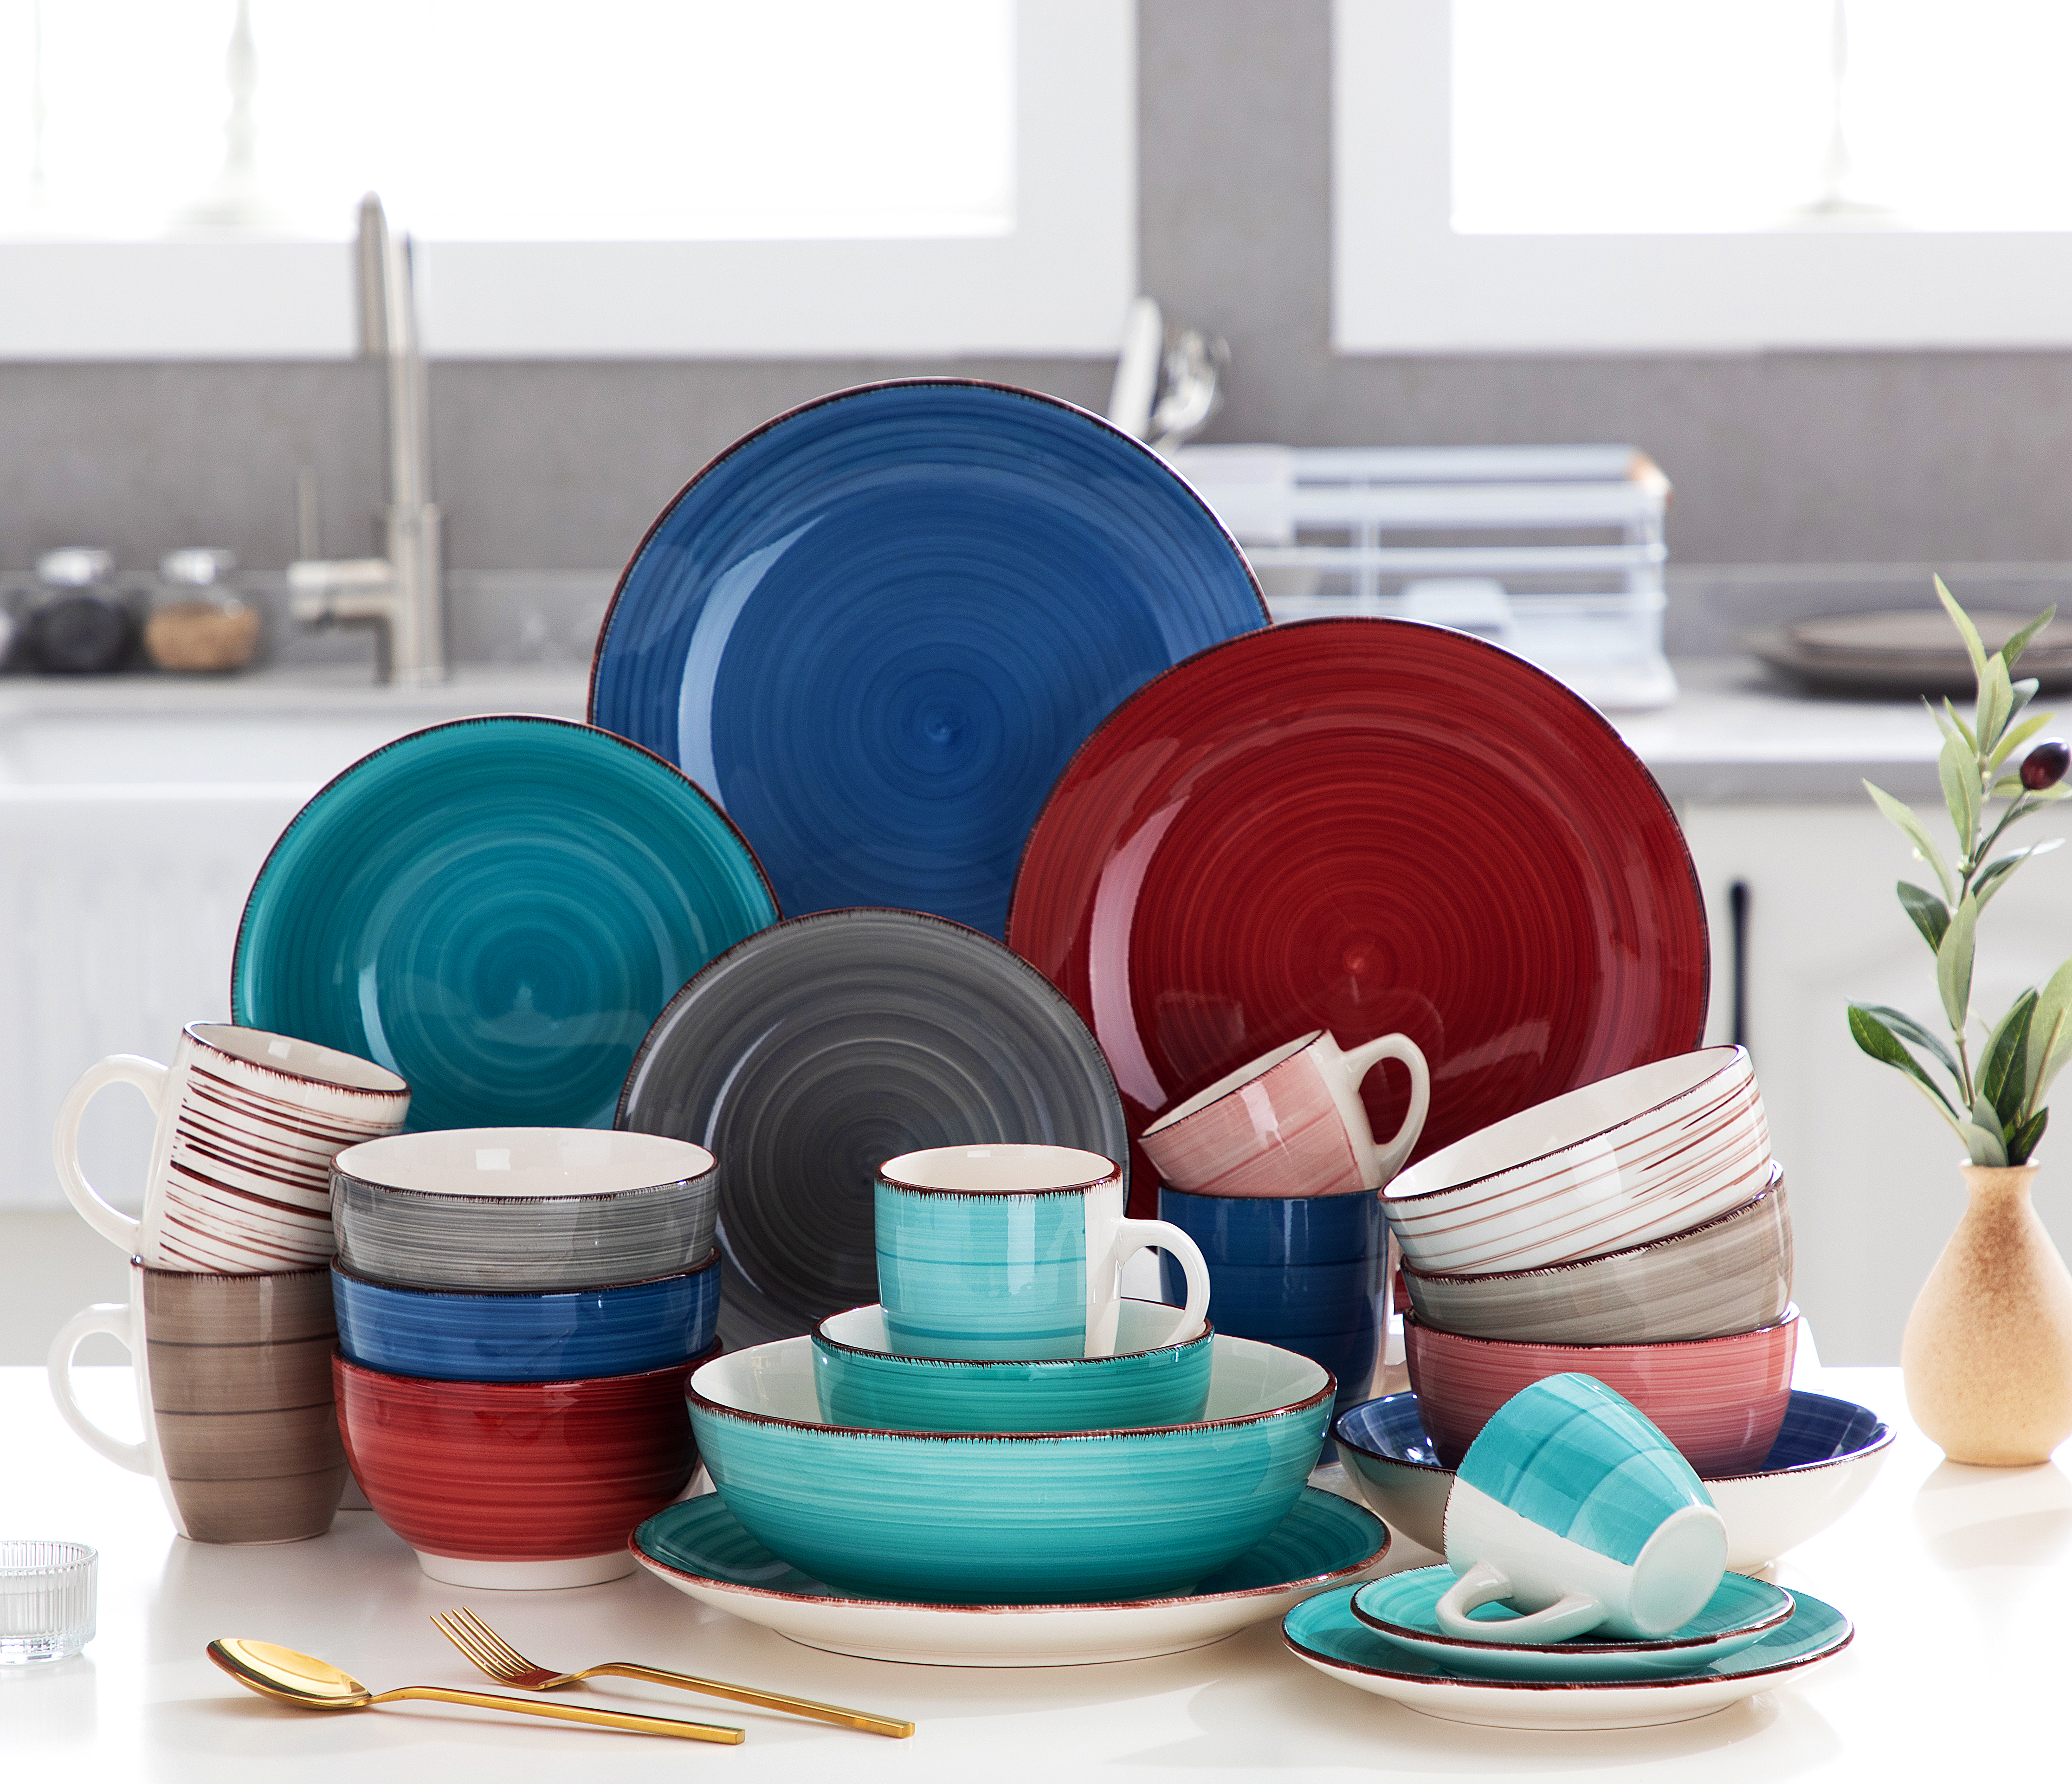 Discover the Best Dinnerware Sets for Everyday Elegance from Vancasso Tableware